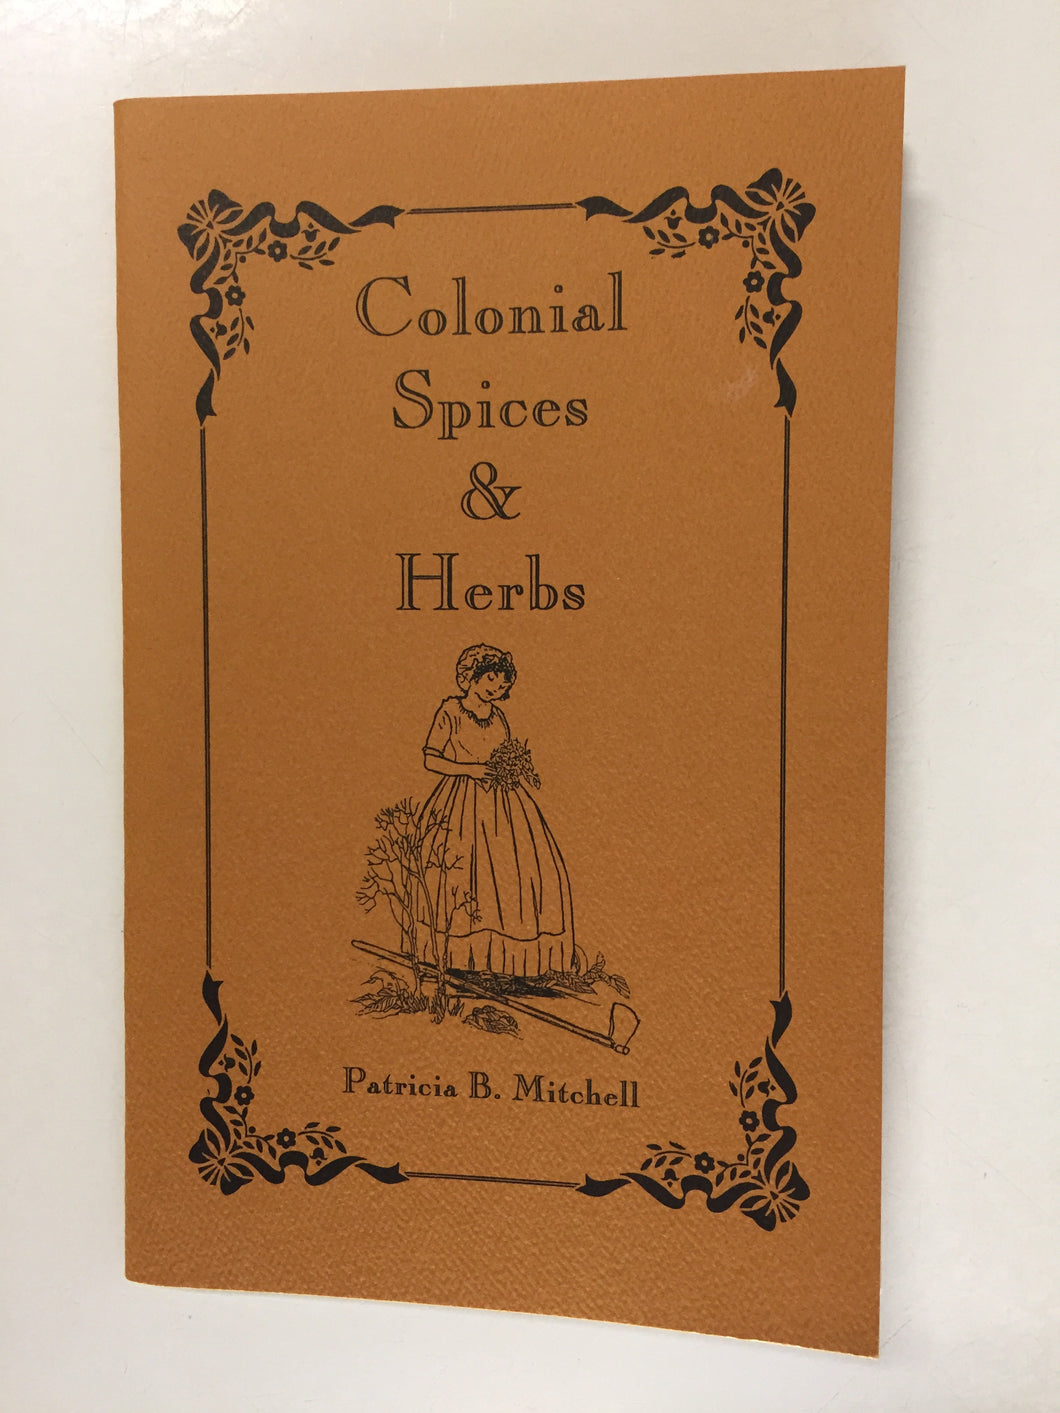 Colonial Spices & Herbs - Slick Cat Books 